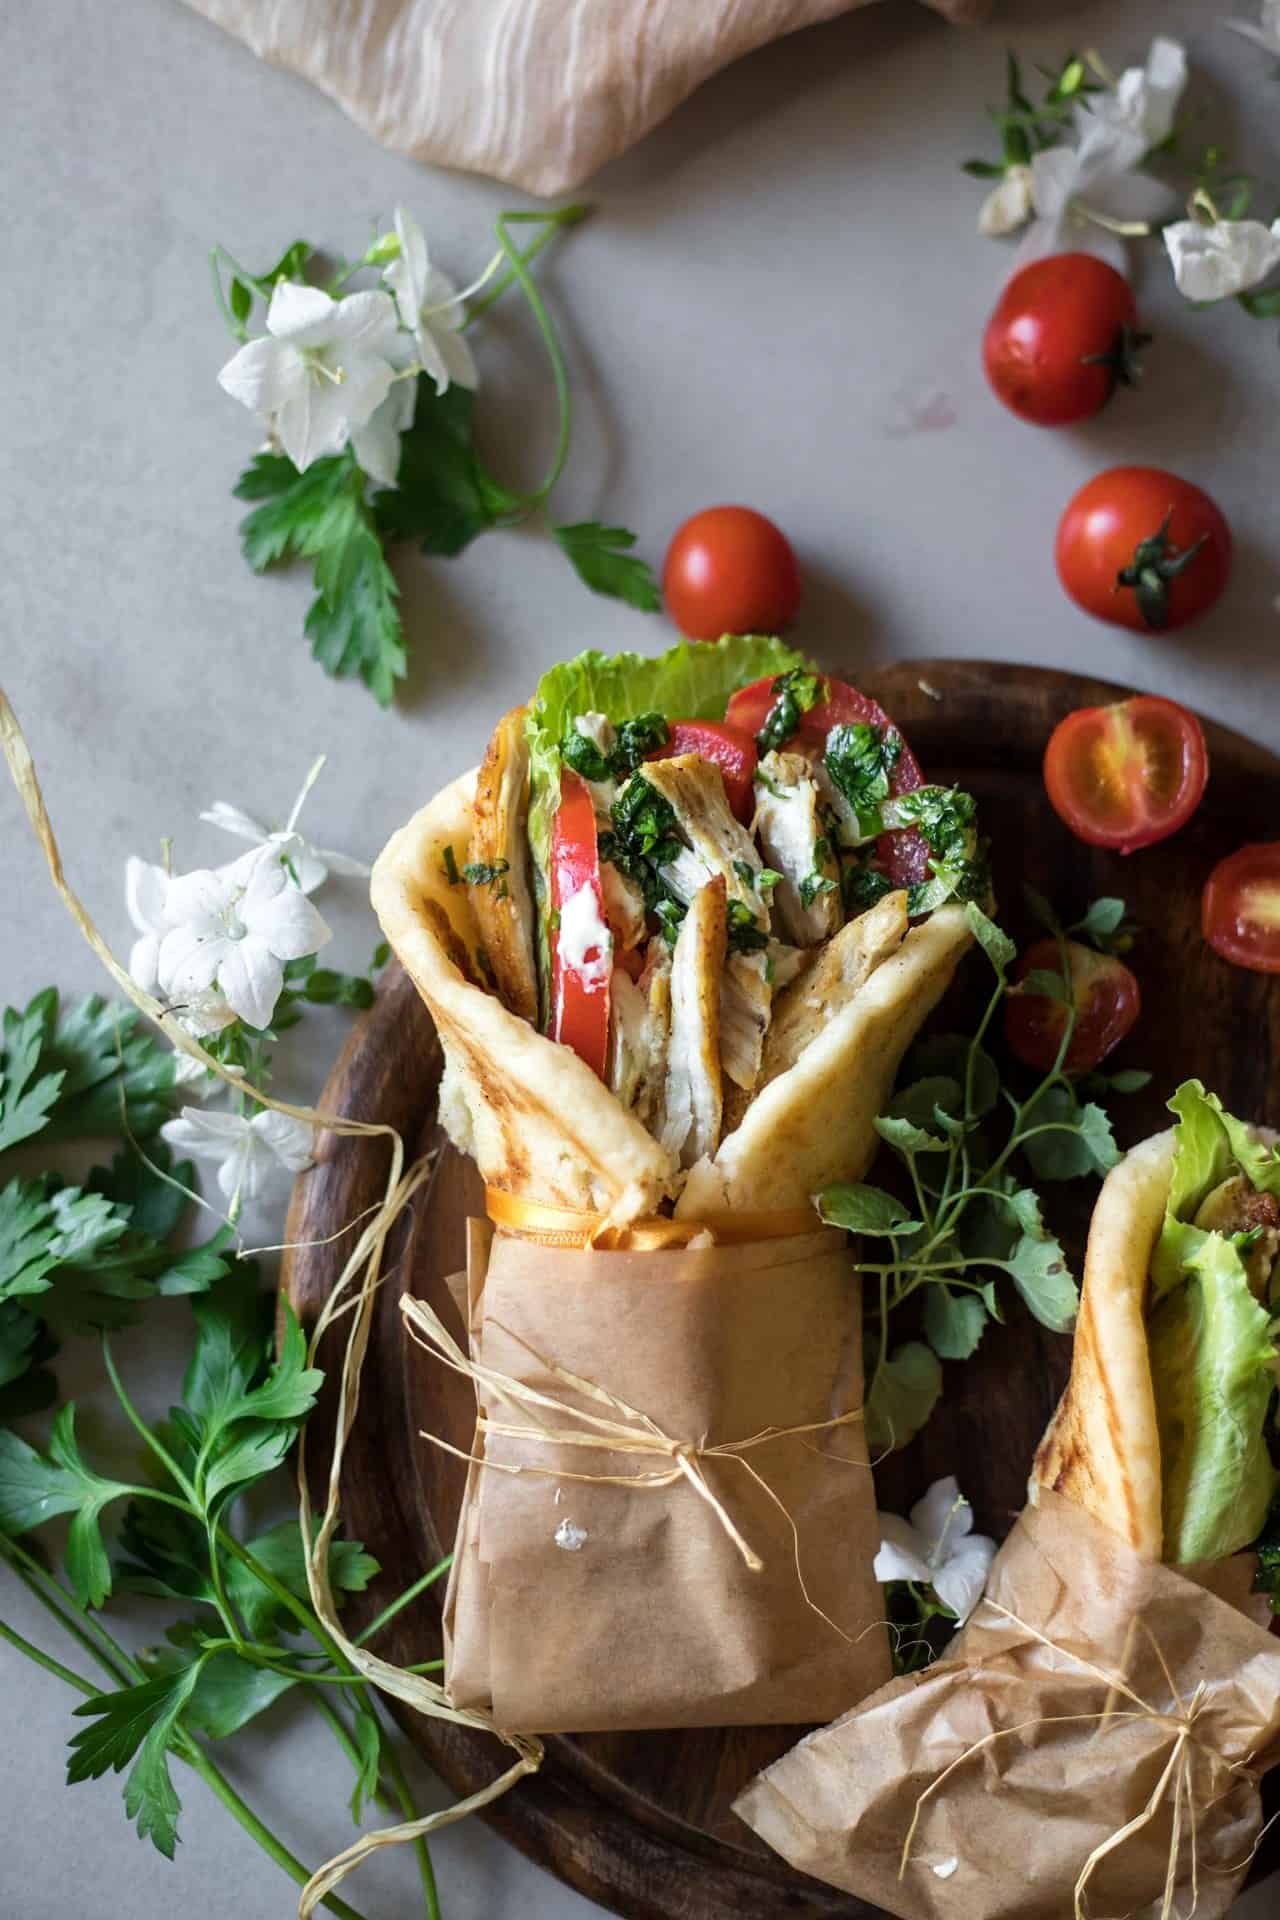 This Gluten Free Chicken Gyro is low FODMAP, super flavorful, light, easy to digest and beyond delicious.